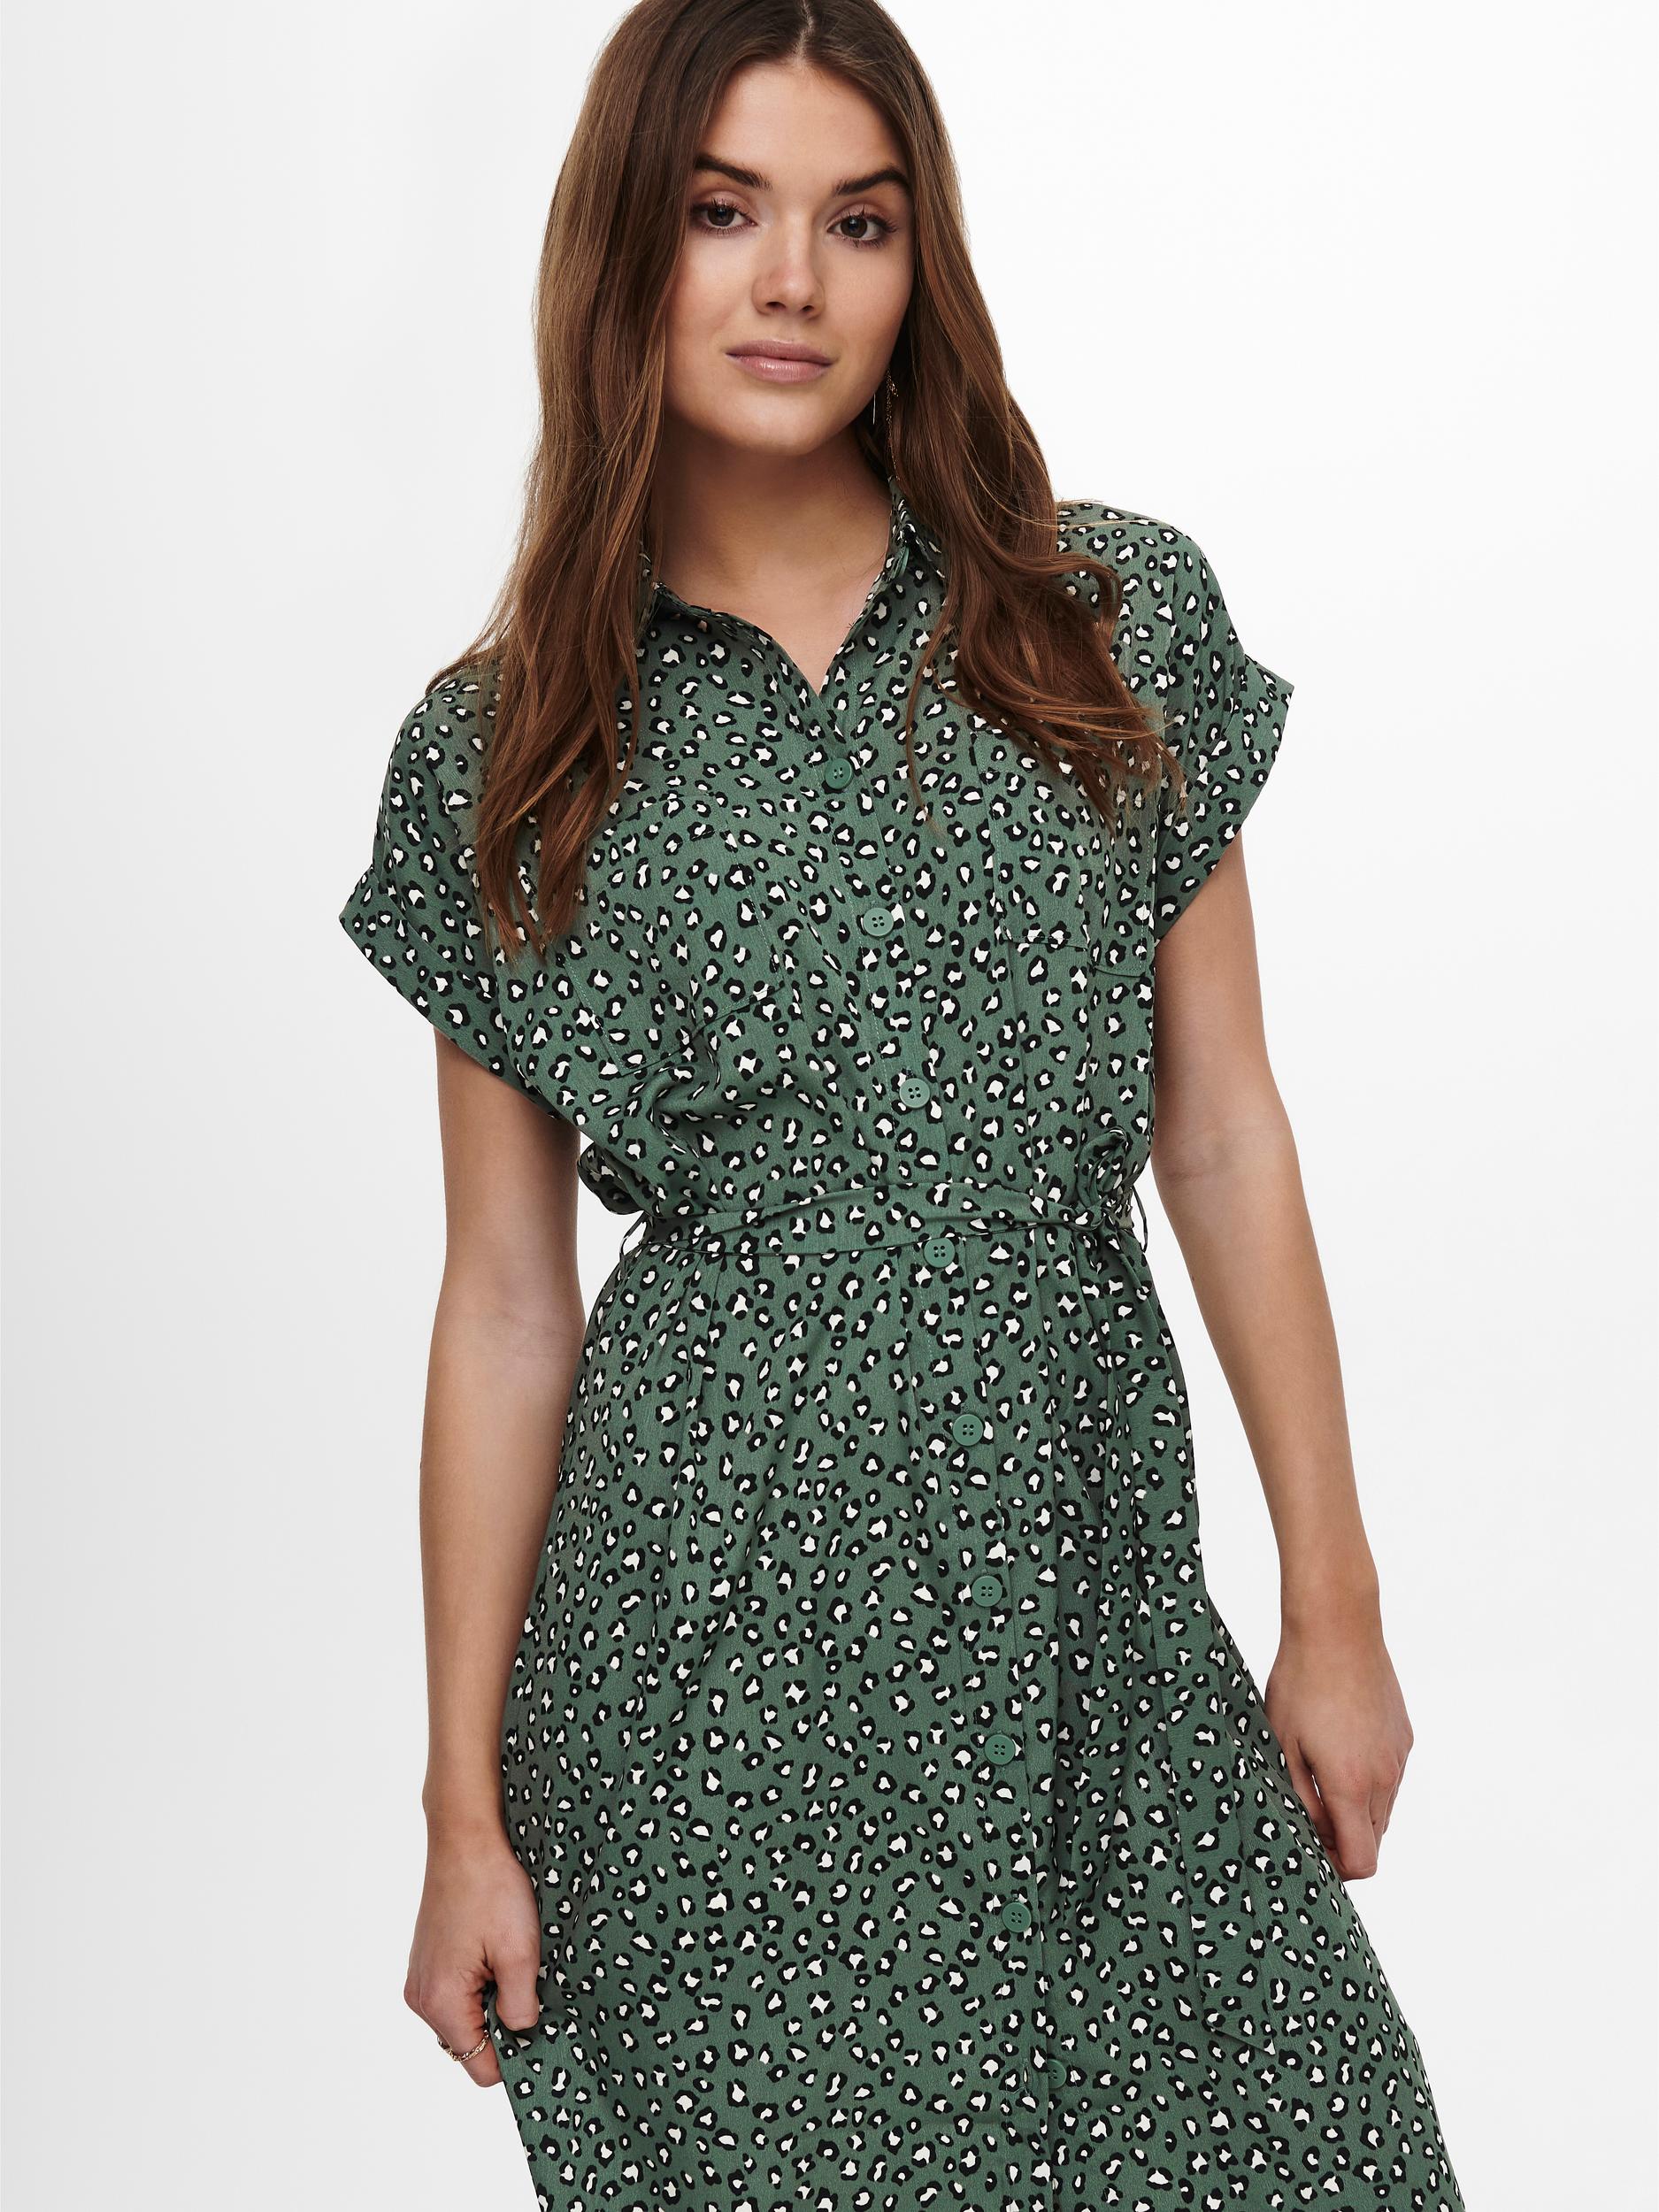 Ladies Hannover Short Sleeve Shirt Dress-Laurel Wreath-Closer View of Front 